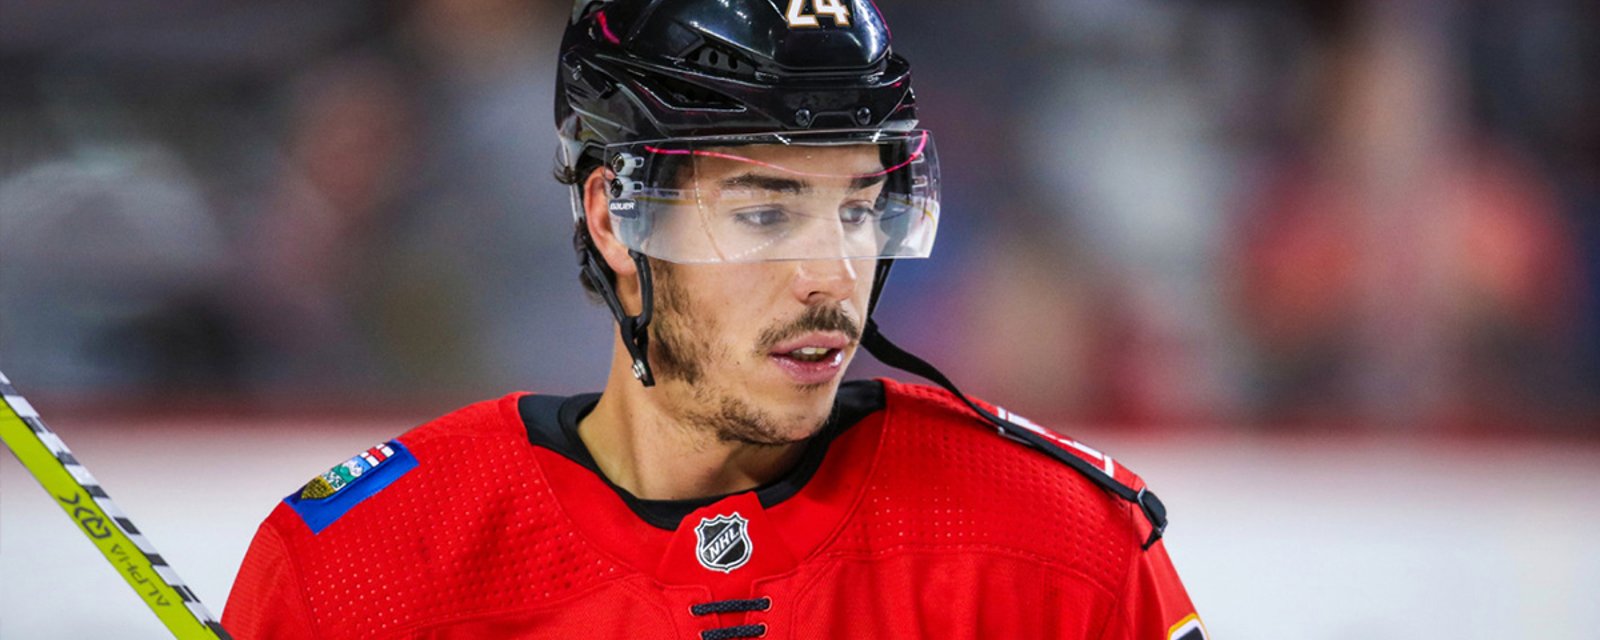 Breaking: Flames activate Hamonic from IR, make AHL move